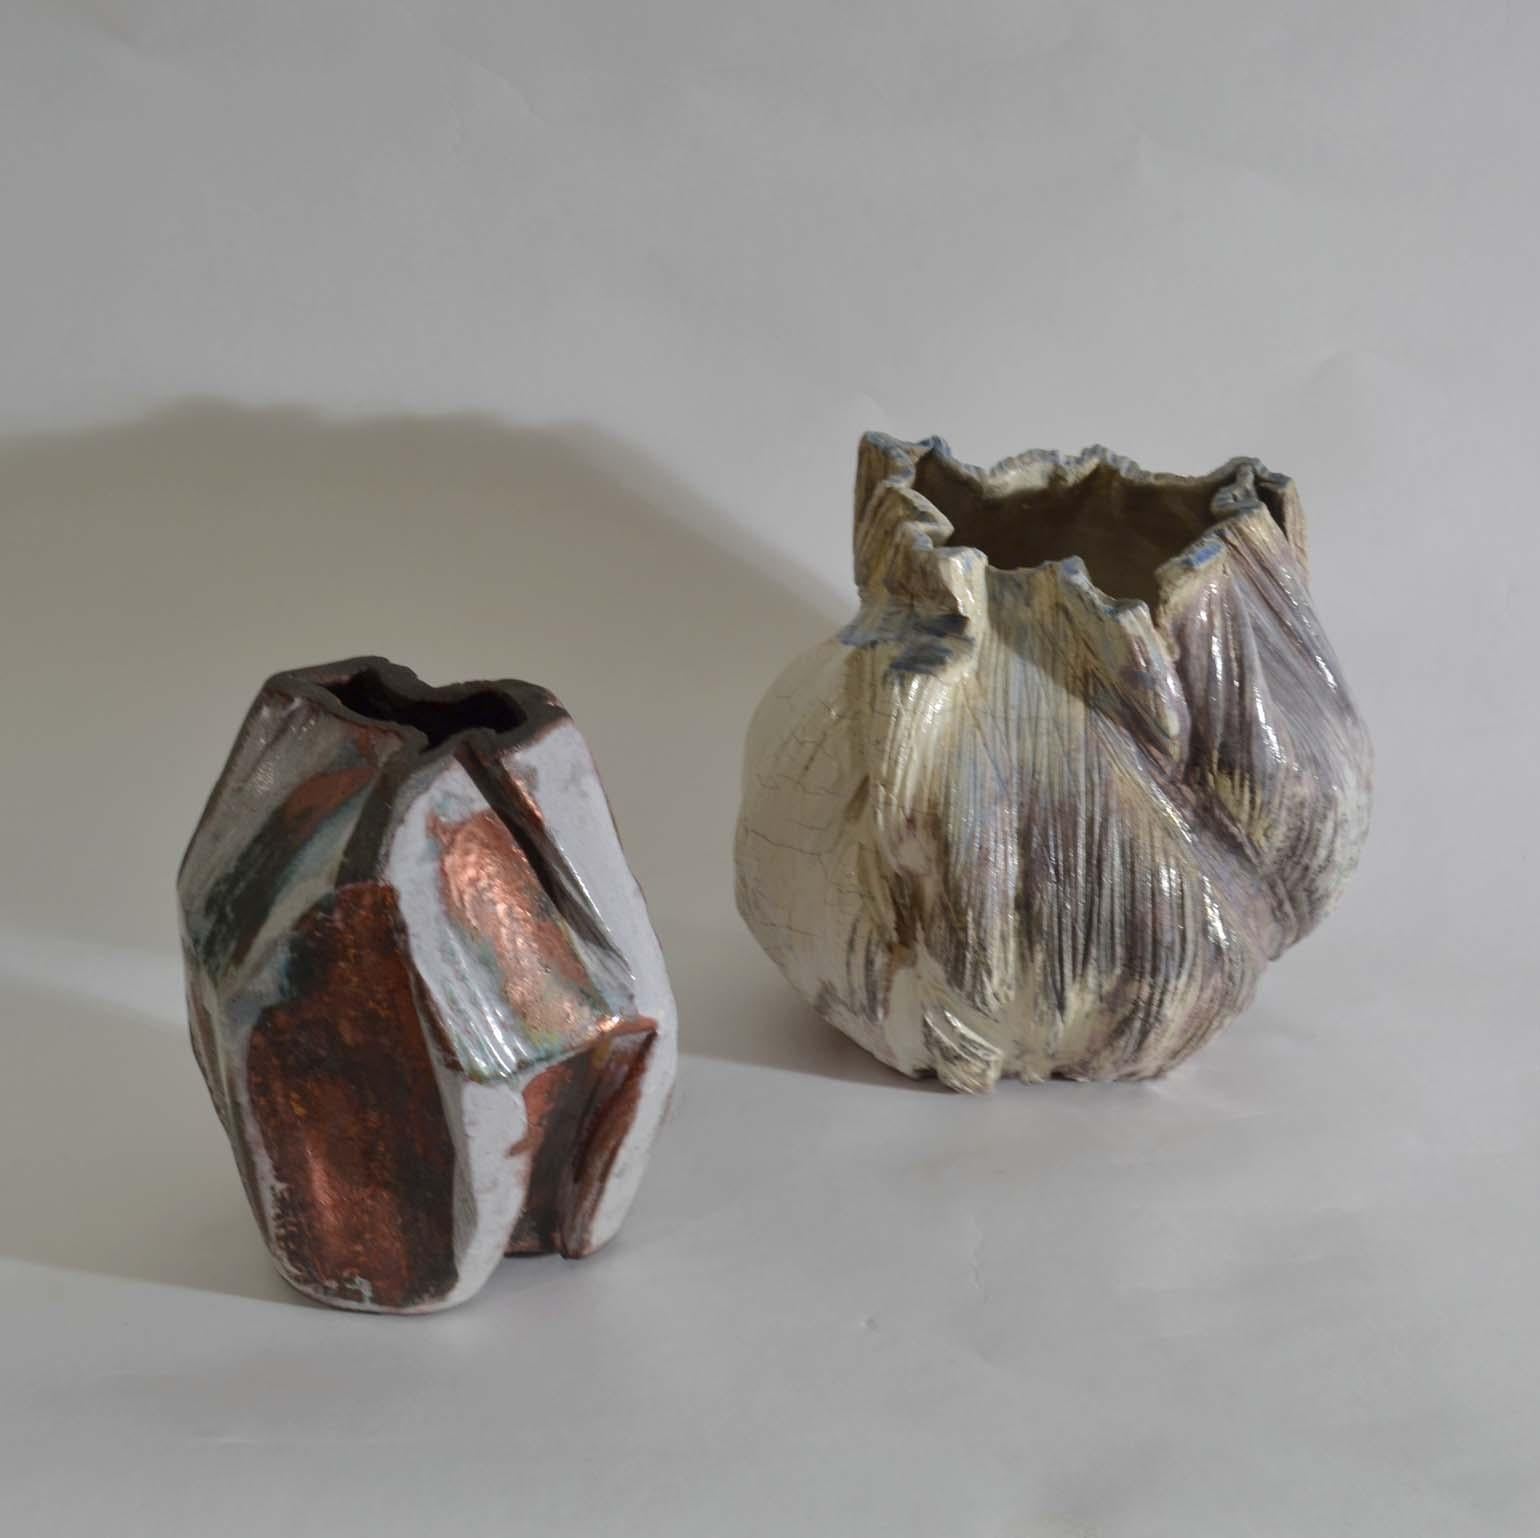 Two organic hand formed vases have different scalloped edged detailing. Scratched and moulded onto the surface are layers of maroon, wine, cardinal red, blue colors. The over glaze helps accentuates its bulbous forms from all perspectives. Signed